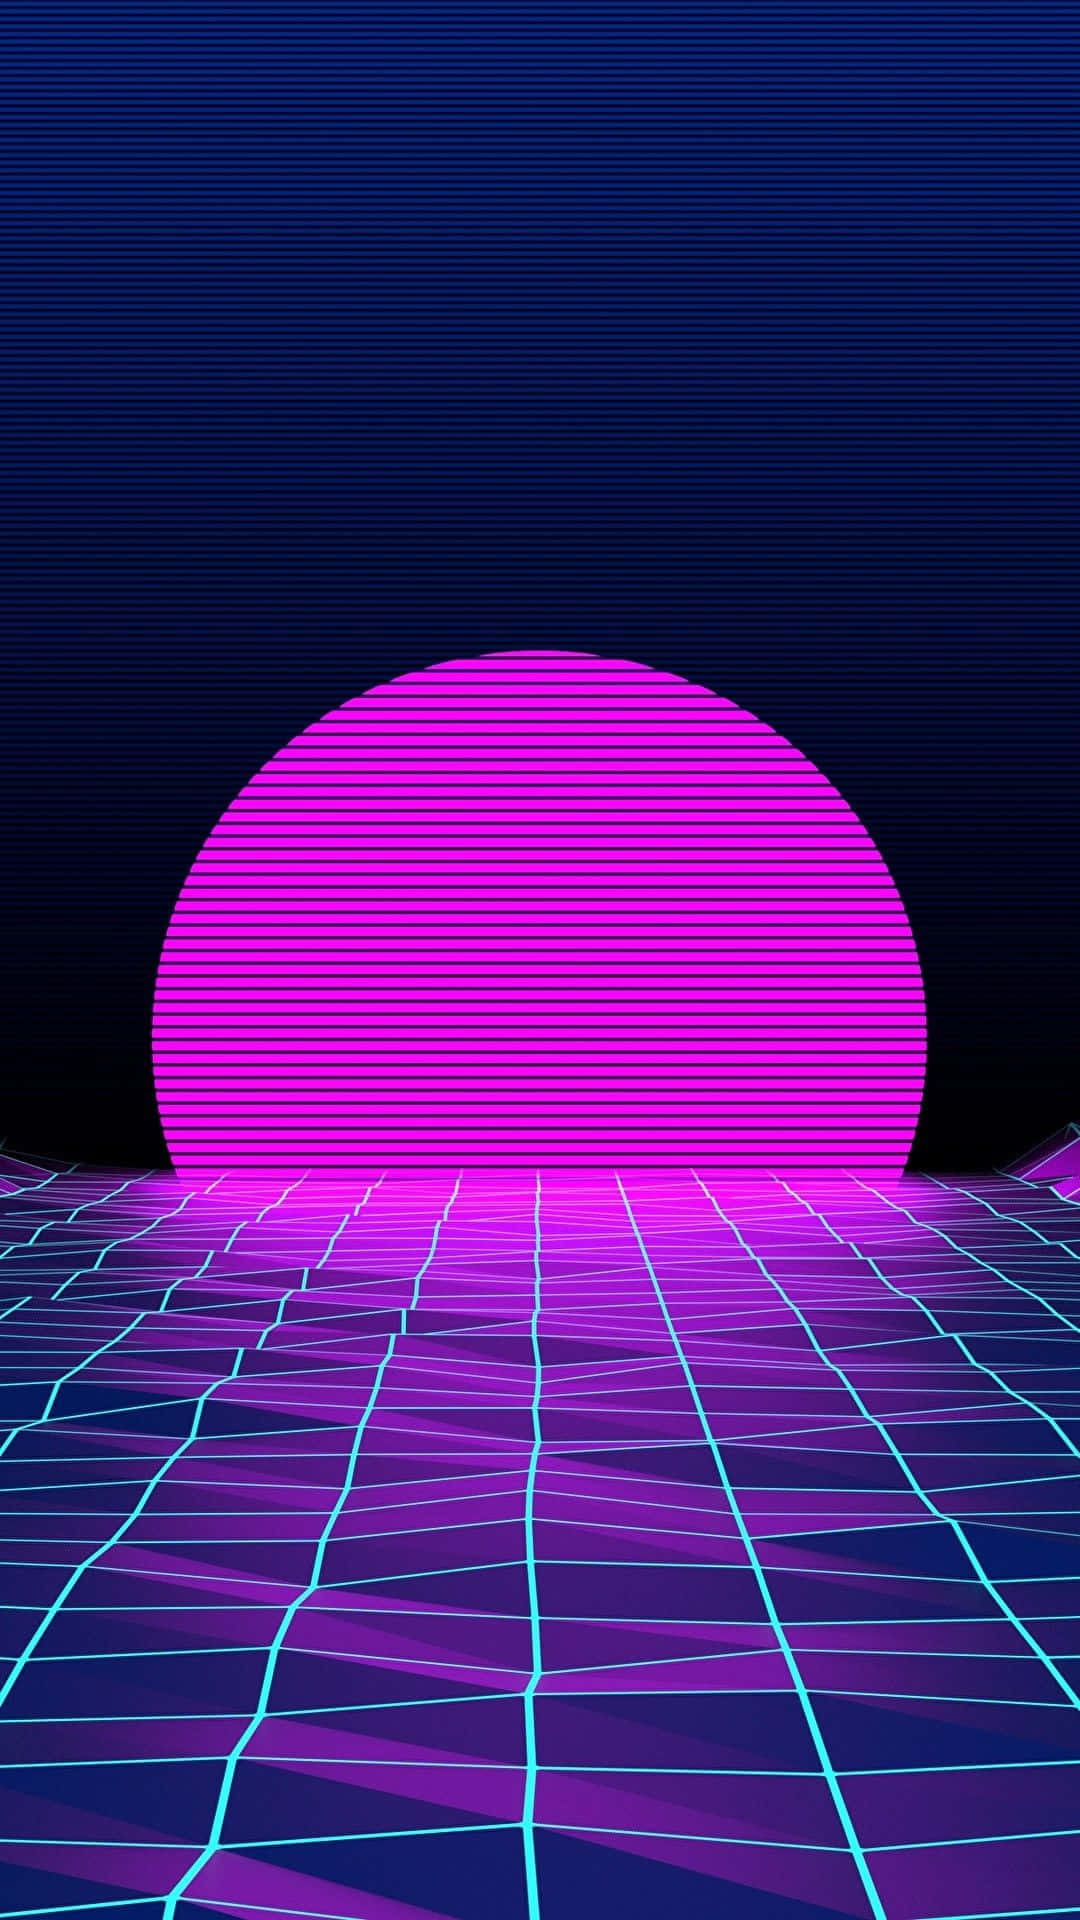 "Travel back in time to the age of neon colors, flashy clothes, and awesome music with an 80s Retro Aesthetic!" Wallpaper